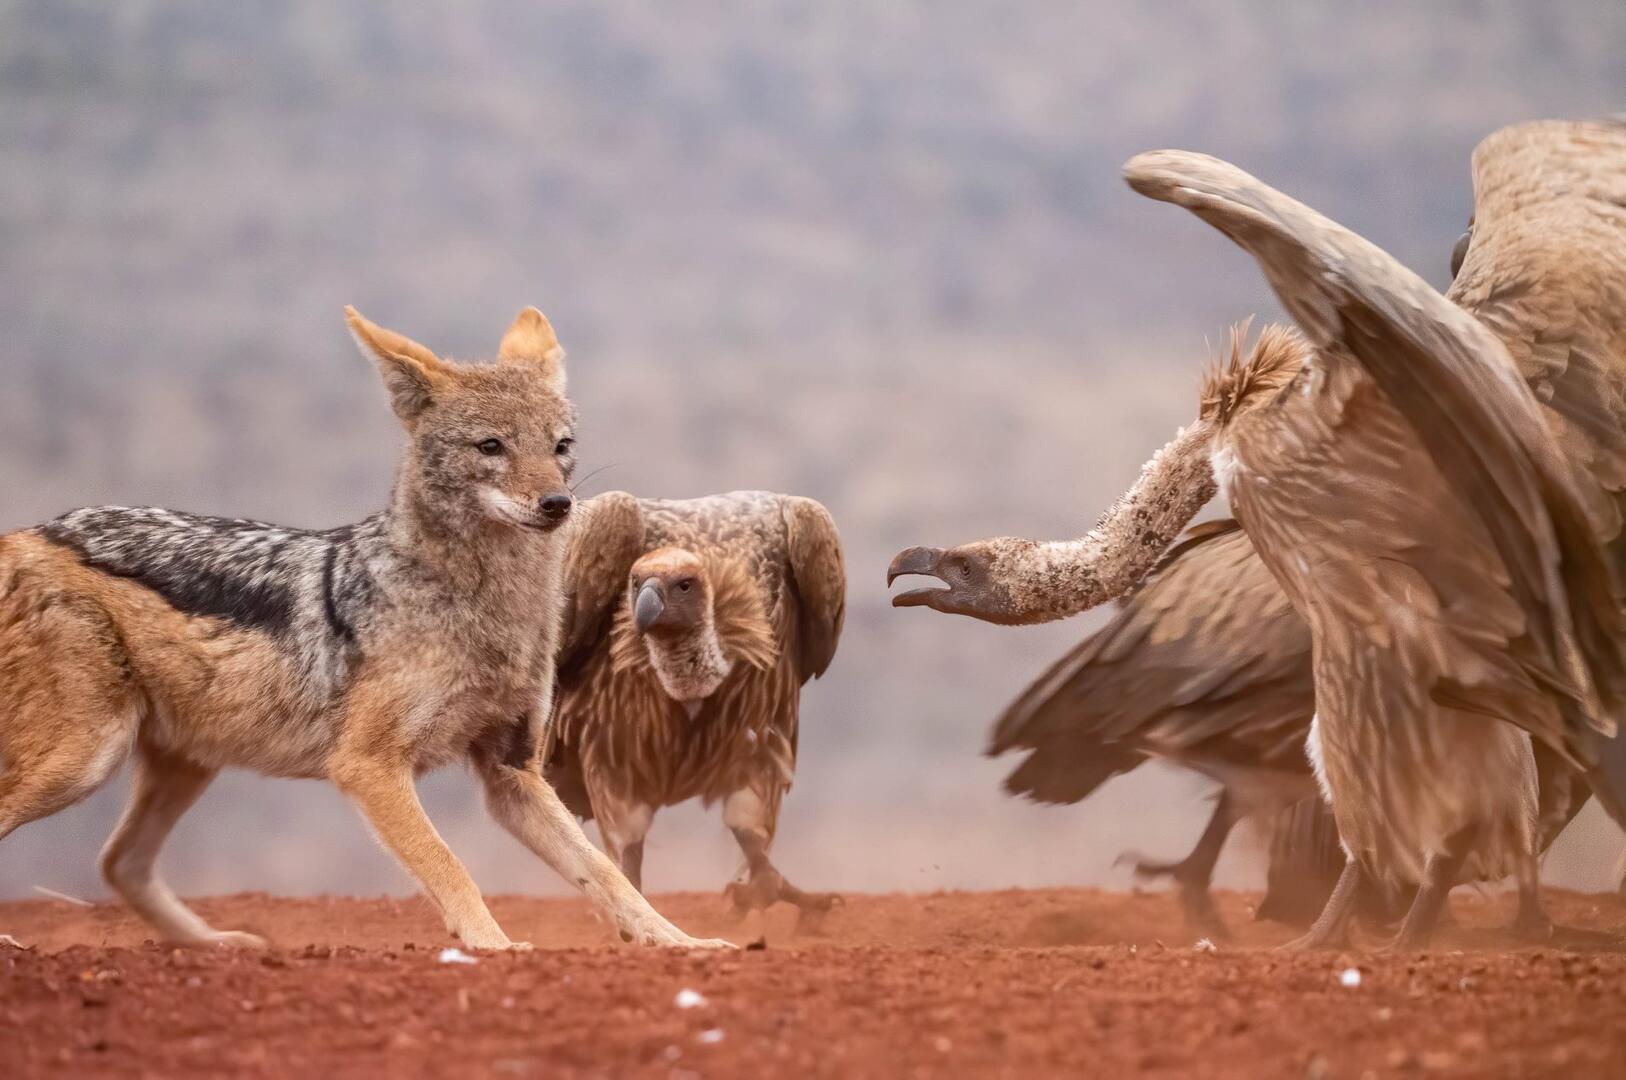  A jackal and vultures interact in the desert.